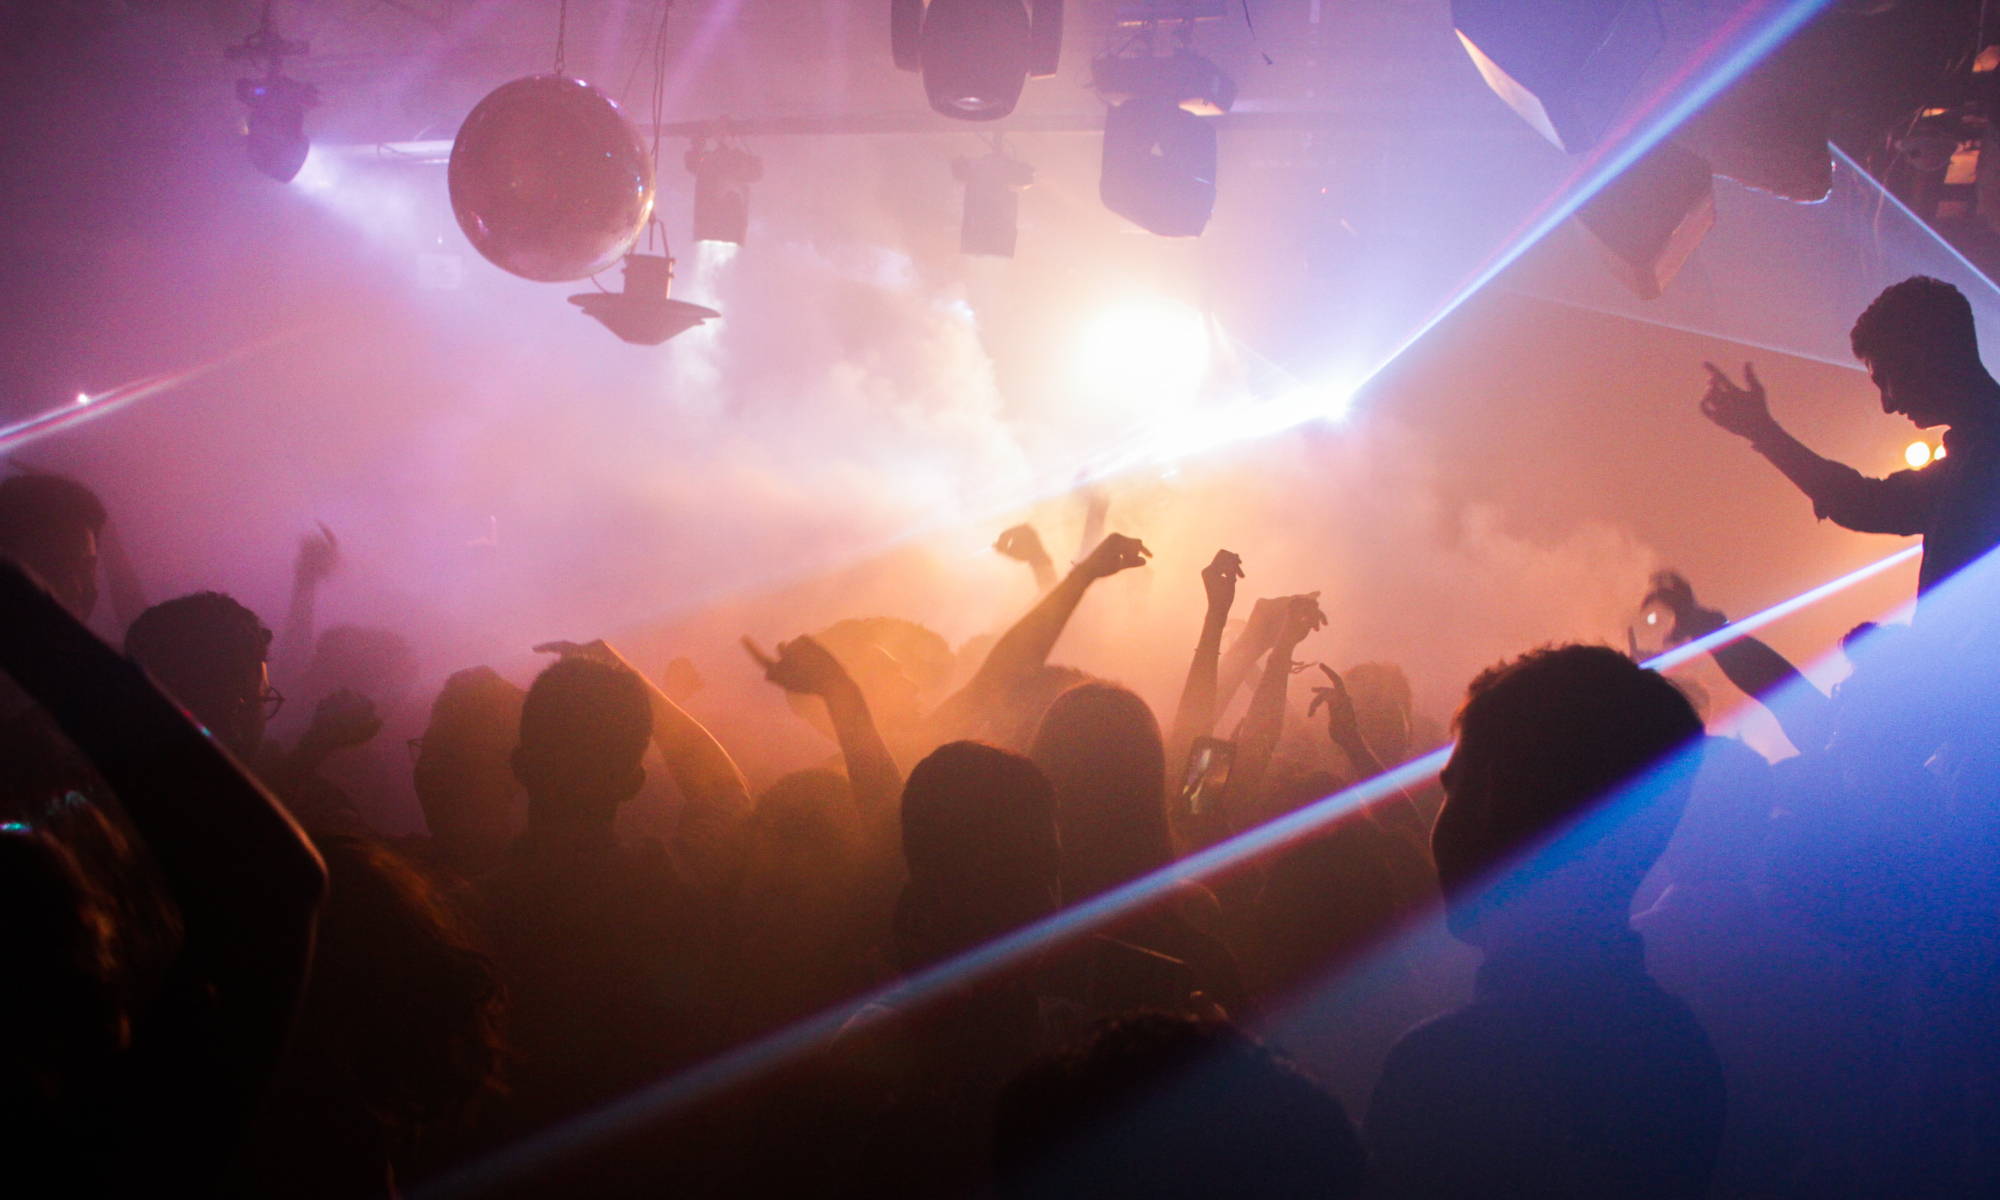 A crowd dances with their hands in the air at a busy nightclub with fog and flashing lights. Image by Sarthak Navjivan. 